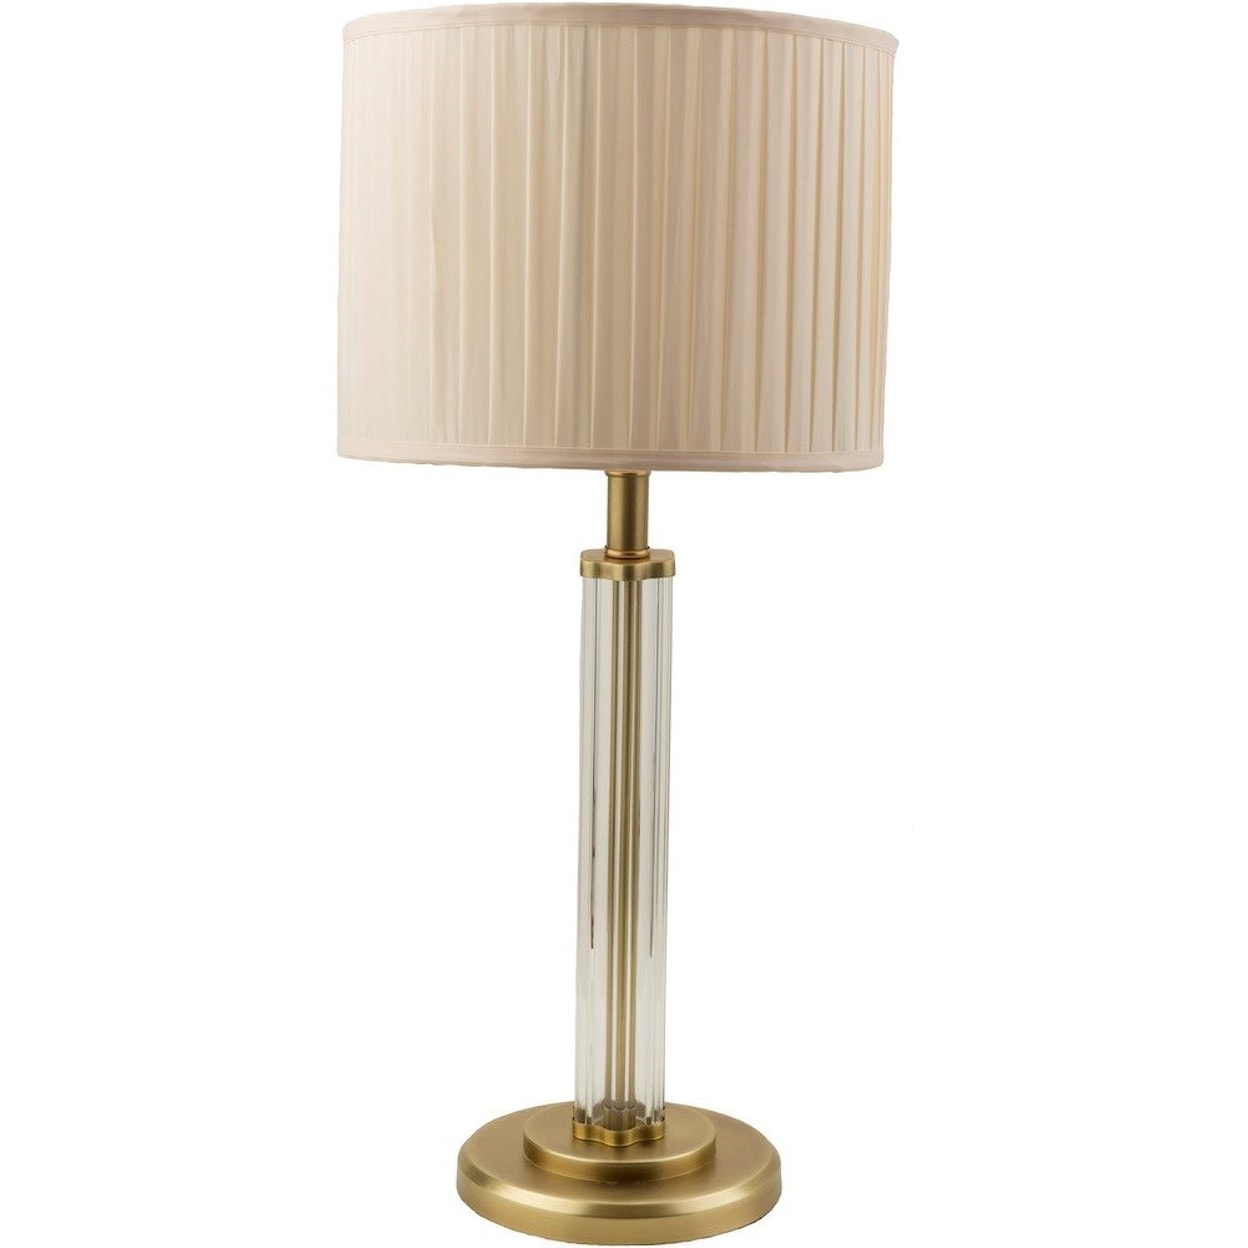 Surya Draper Antique Brass Traditional Table Lamp